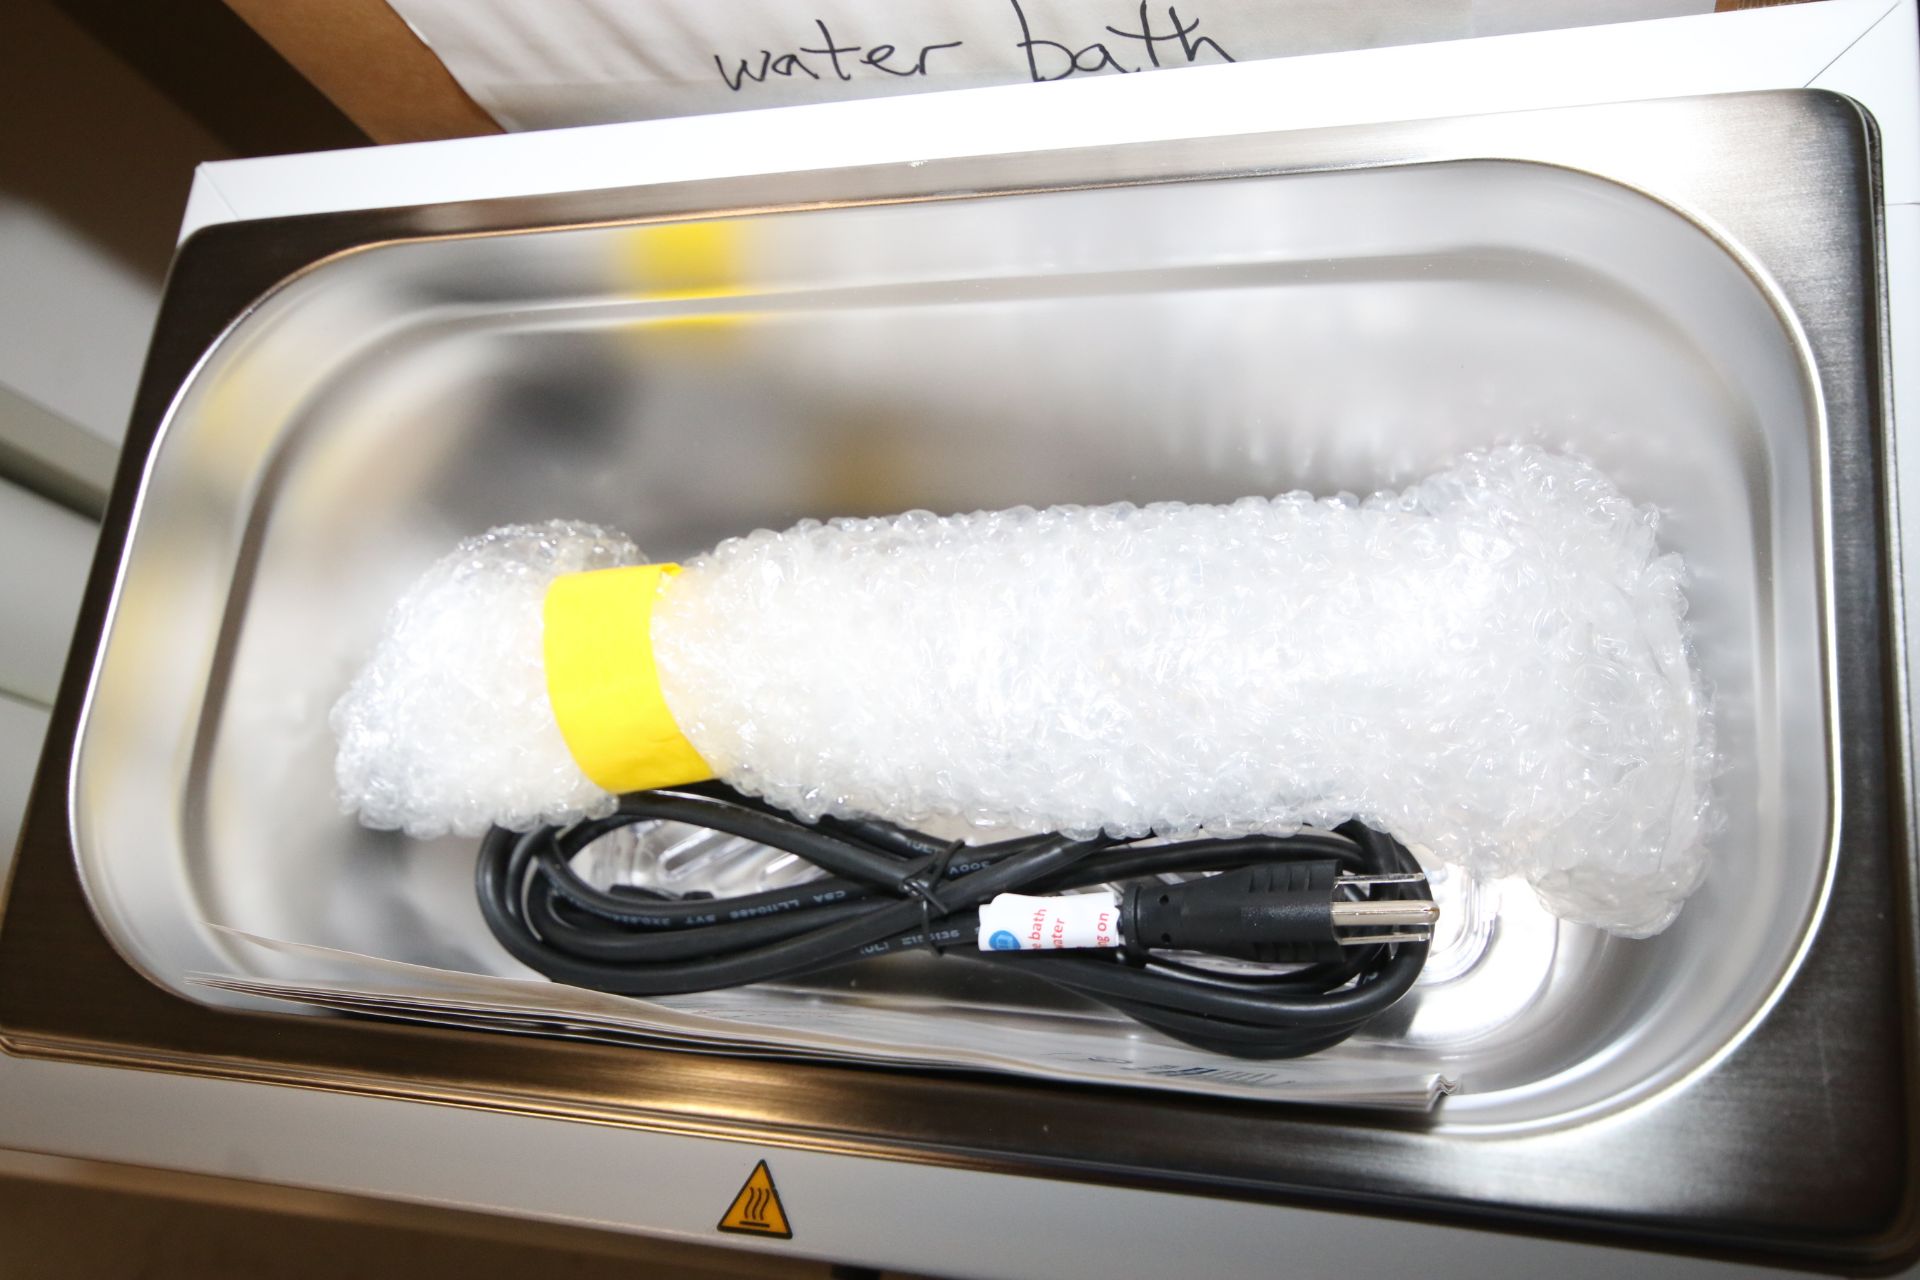 NEW VWR Unstirred S/S Water Bath, Type 89032-214, S/N WJ1049010, 120 Volts, Internal Dims.: Aprox. - Image 3 of 5